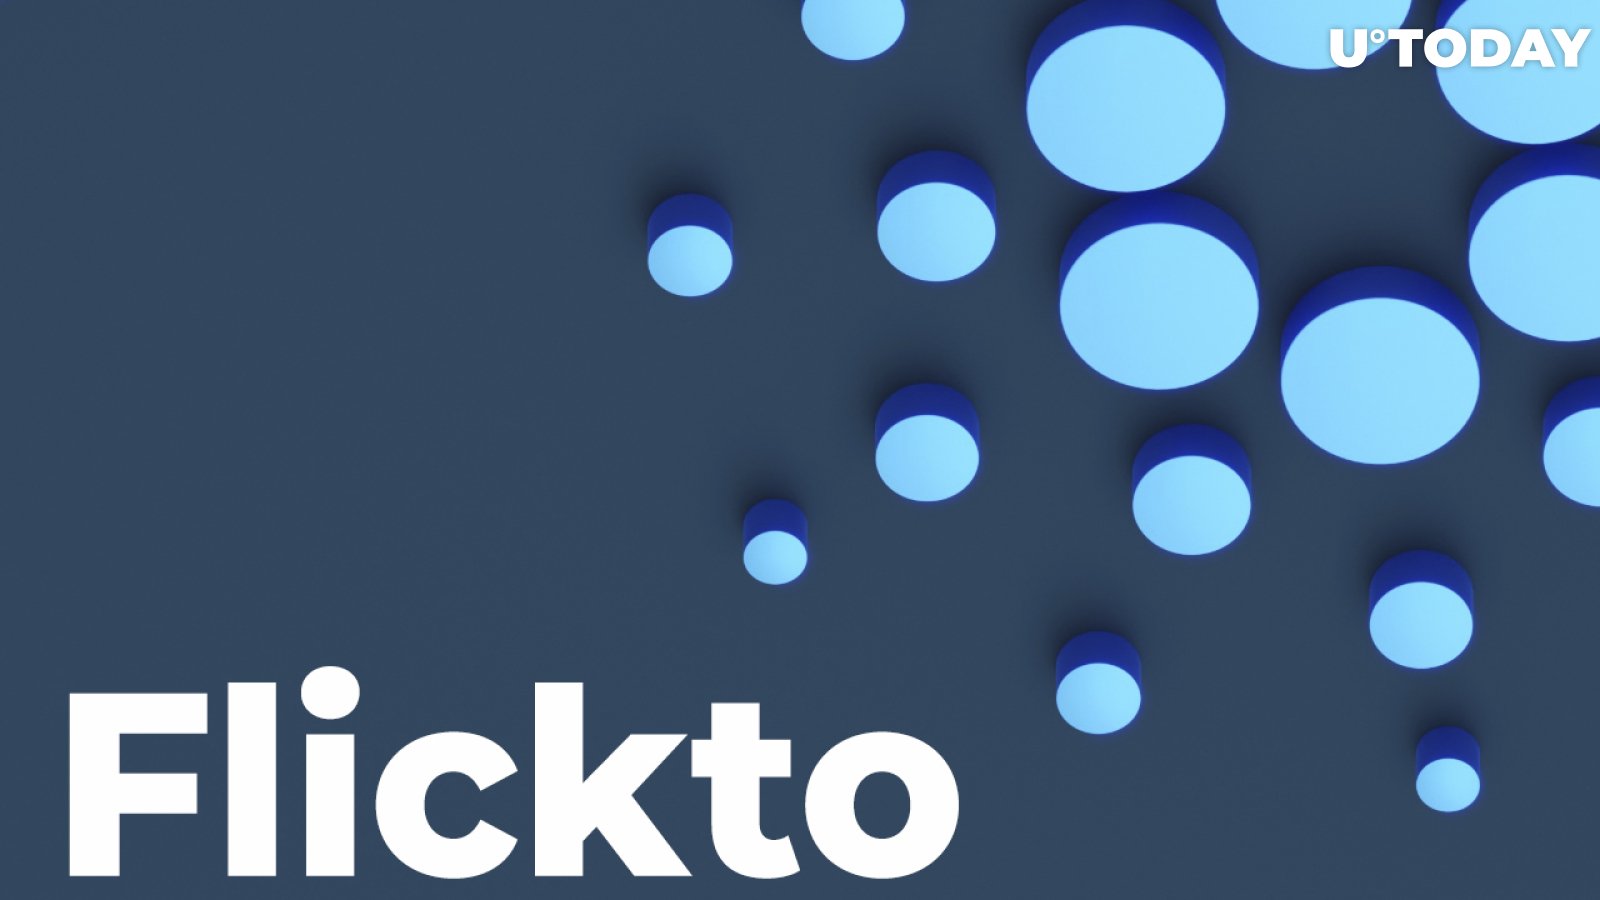 Flickto (FLICK) Introduces First-Ever Media Launchpad on Cardano (ADA)